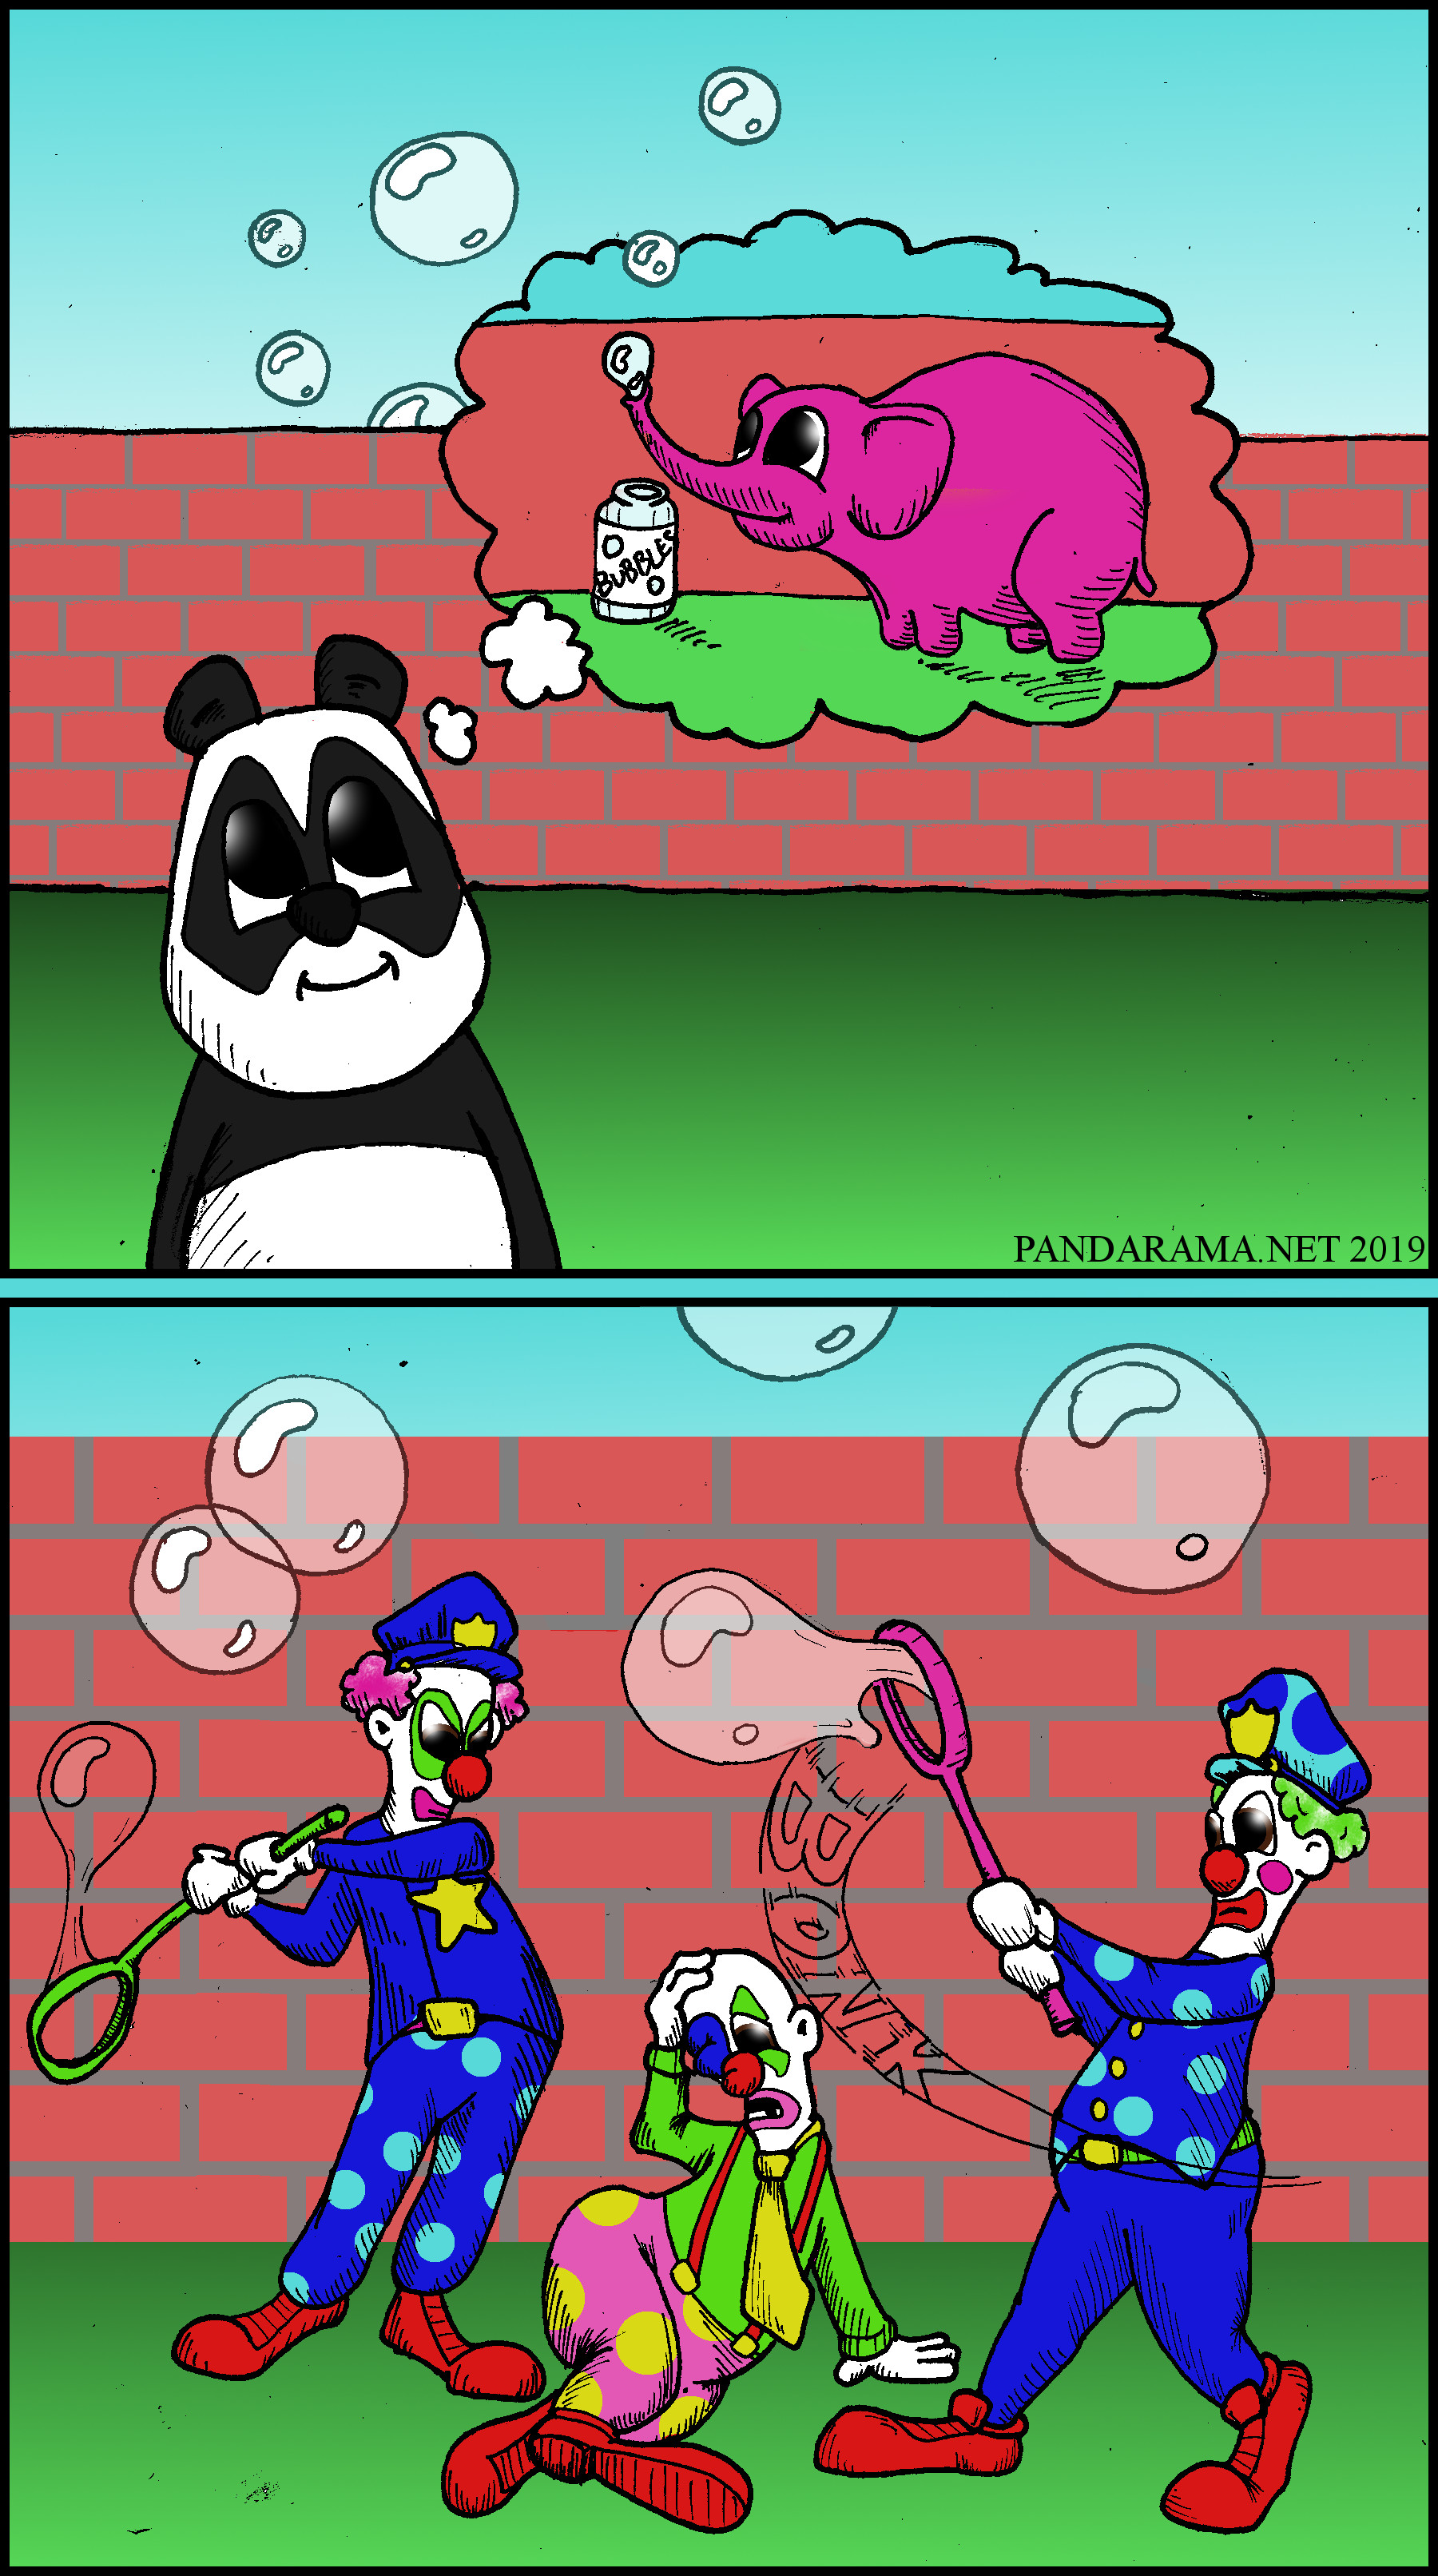 webcomic of clown getting beaten with bubble wands behind wall, panda imagines an elephant blowing bubbles.